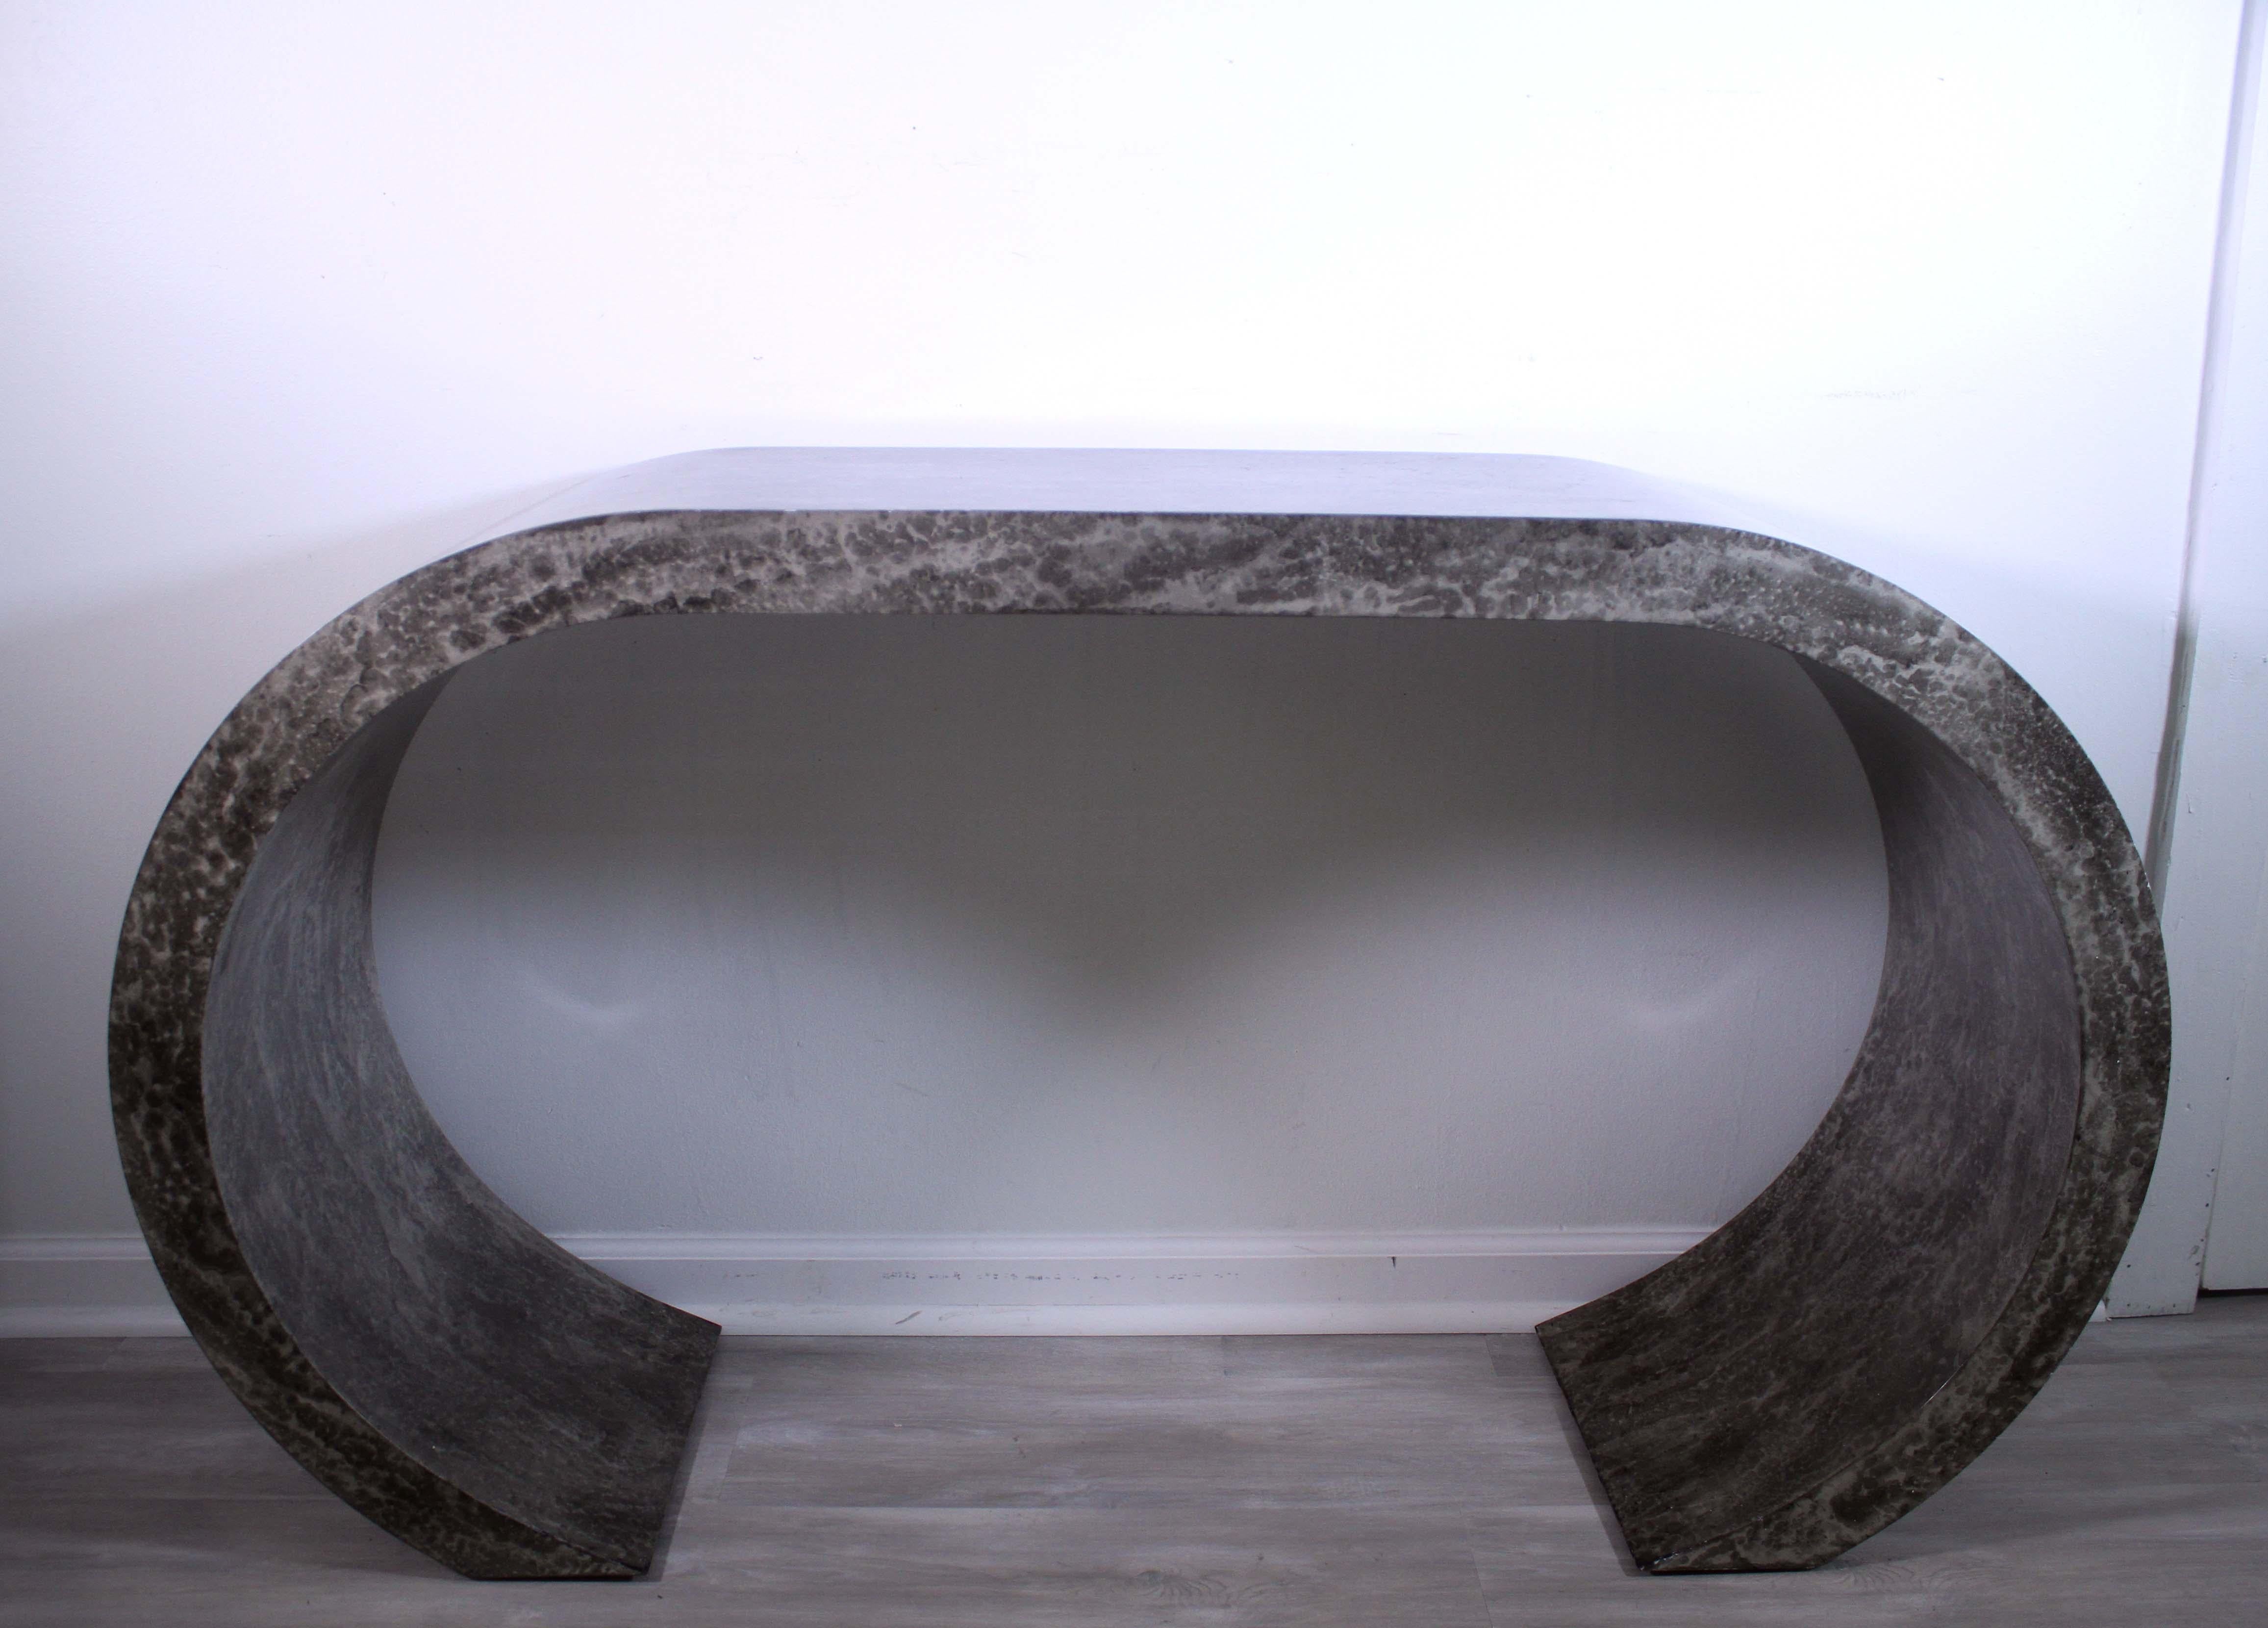 This postmodern curved faux stone console table is a contemporary and unique piece of furniture perfect for adding a modern touch to any space. The sleek design features a curved profile and an eye-catching faux stone top. The sturdy metal frame